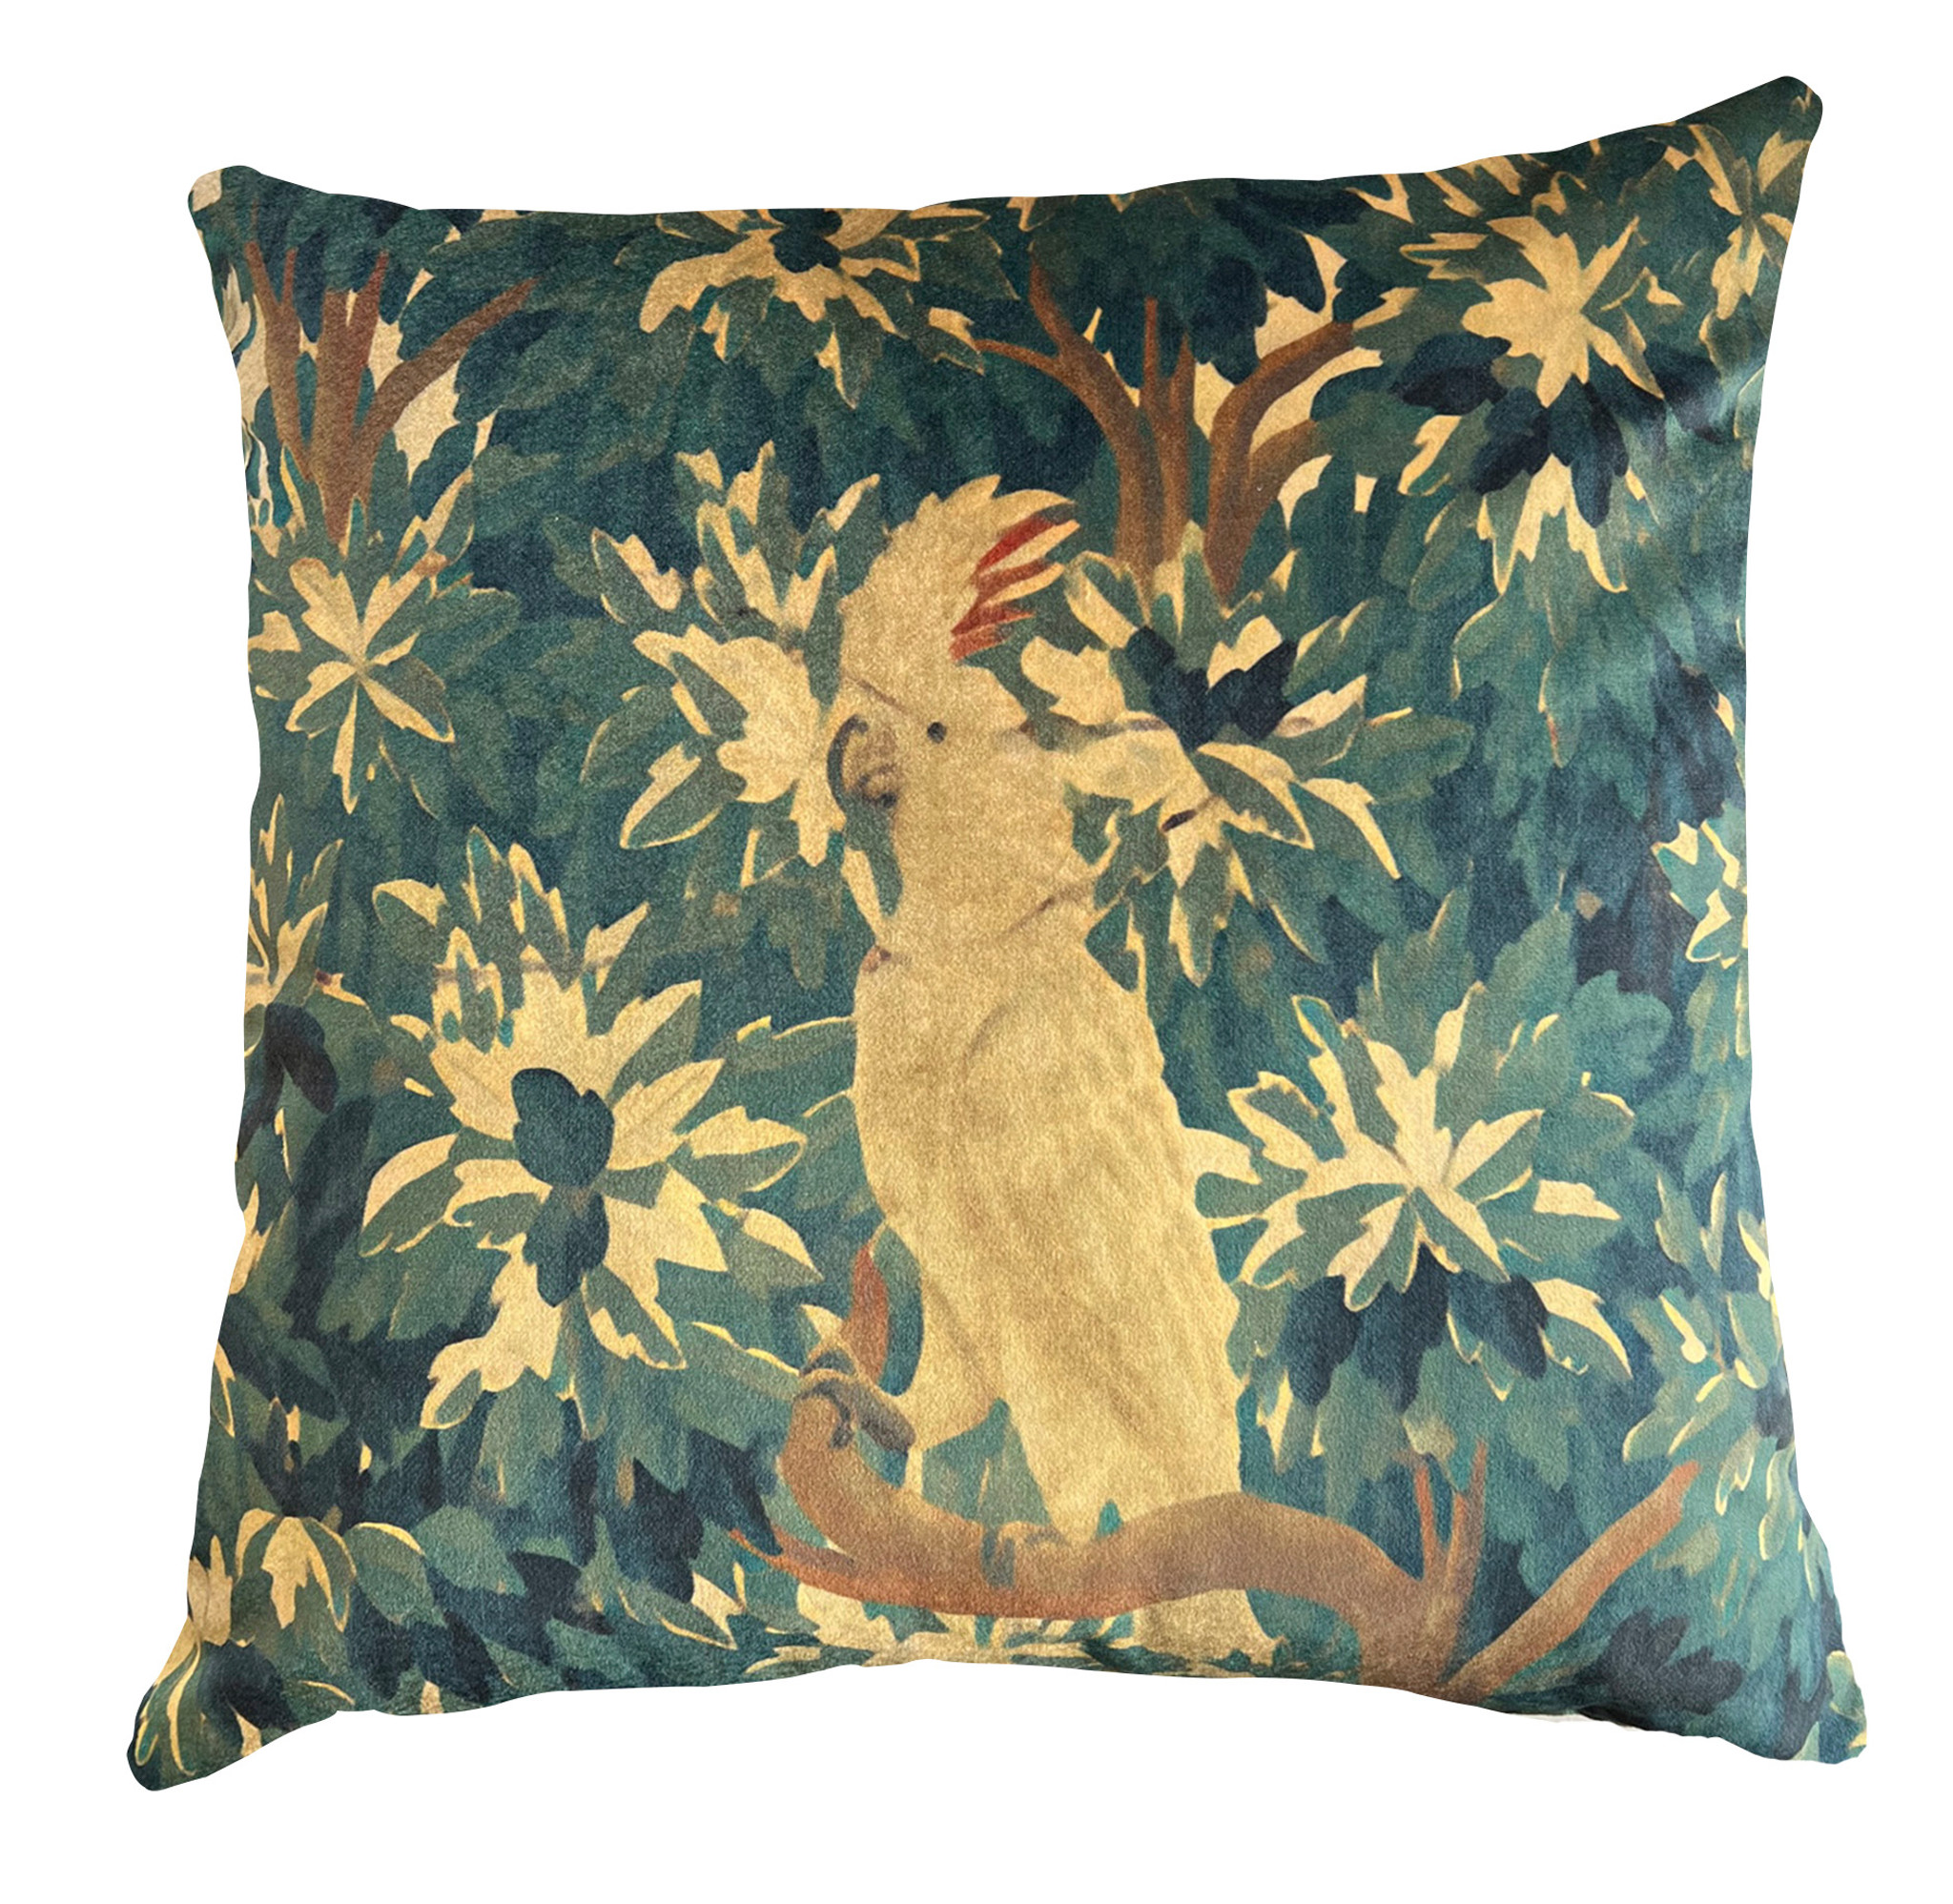 Cushion Cover - Woven Magic - Tapestry with Cockatoo